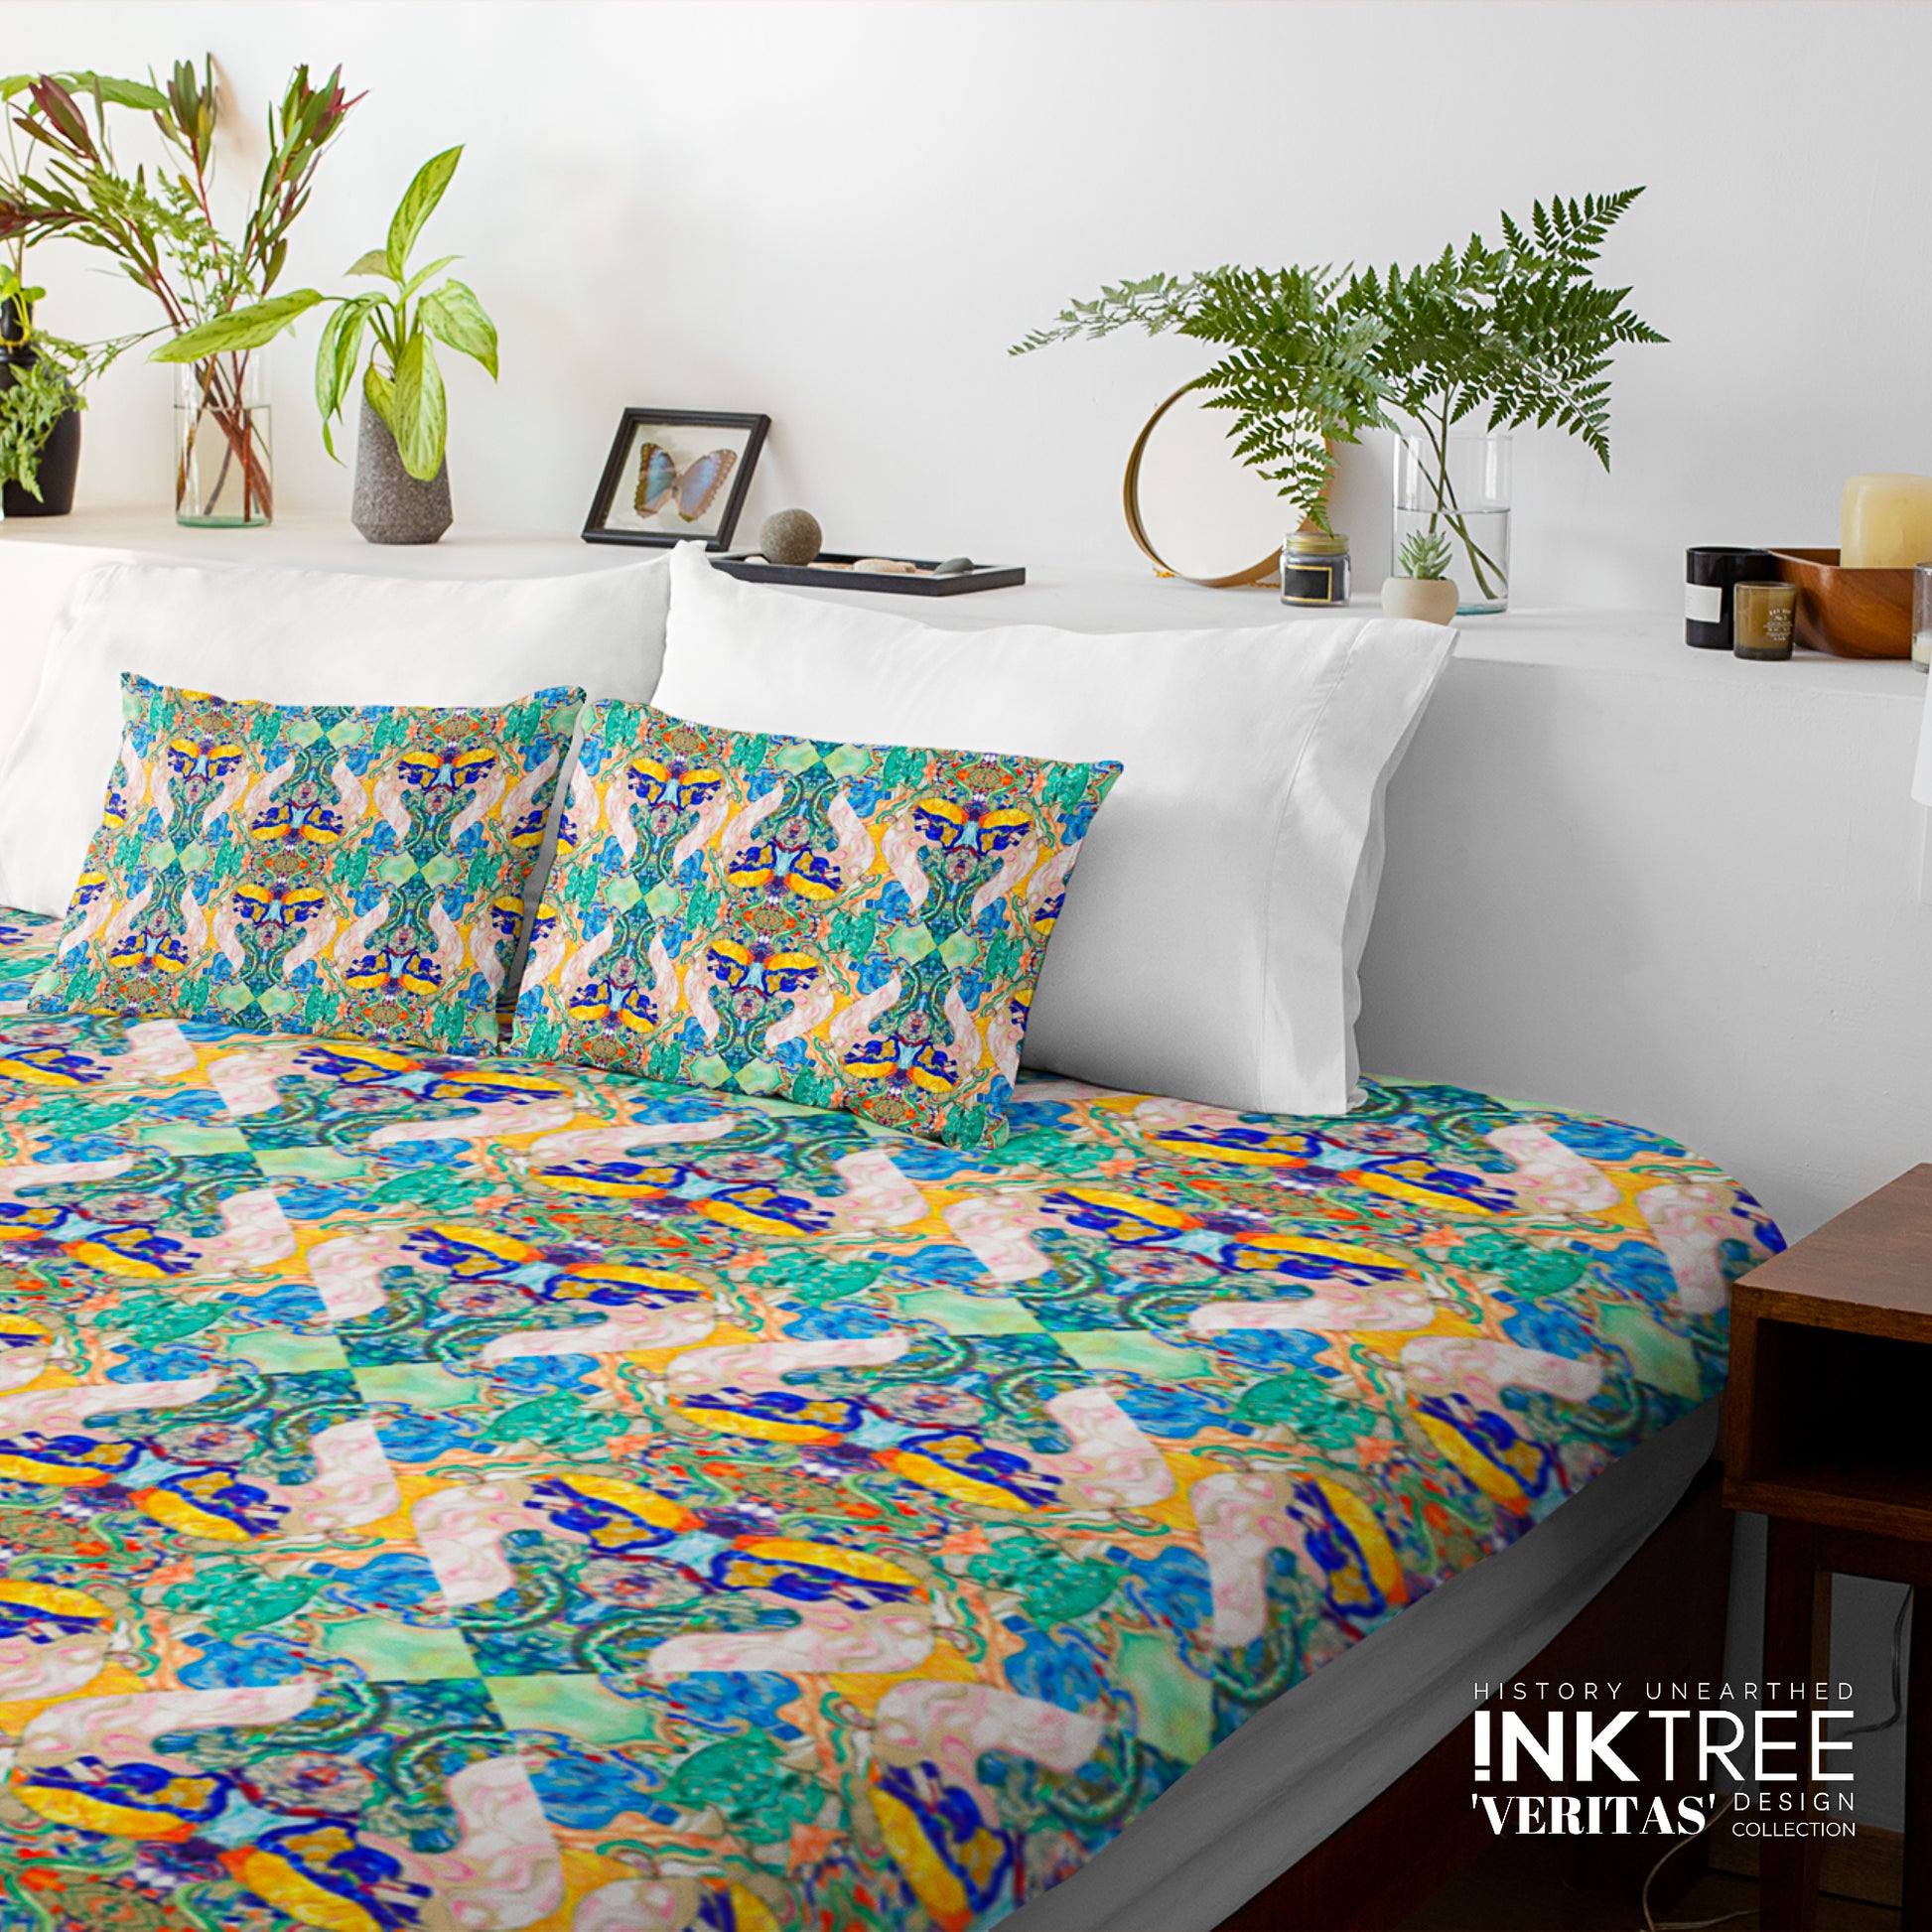 A doona cover and pillows with blue, green, gold, pattern on a white wall, leaning against white pillows and green plants in vases.